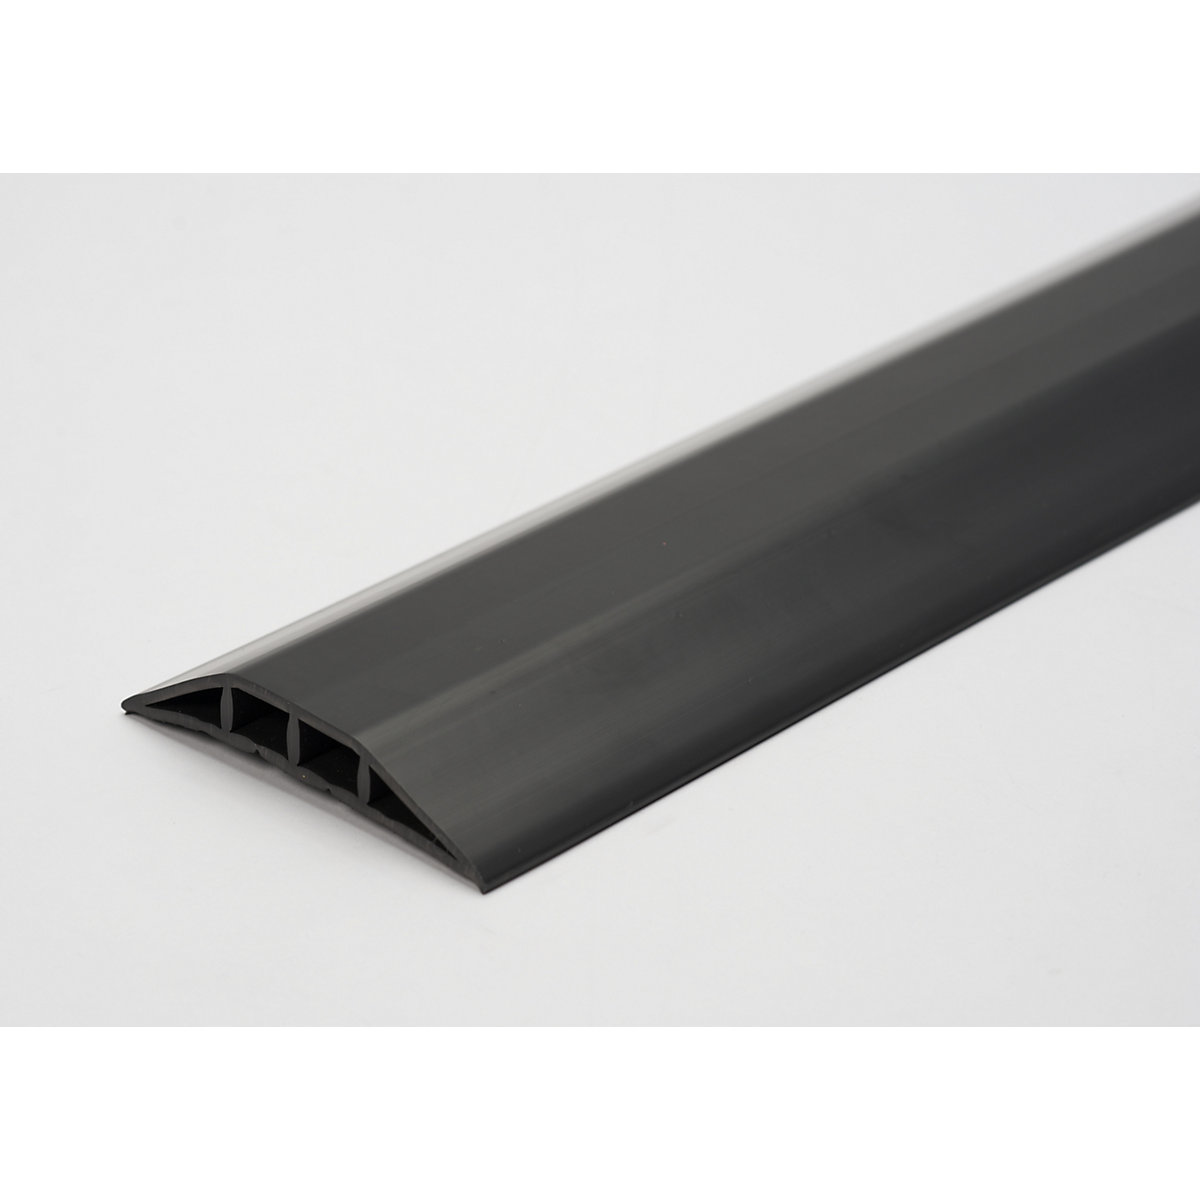 Plastic cable duct, for cables and hoses with Ø up to 10 mm, black, 2 chambers, length 1.5 m-5